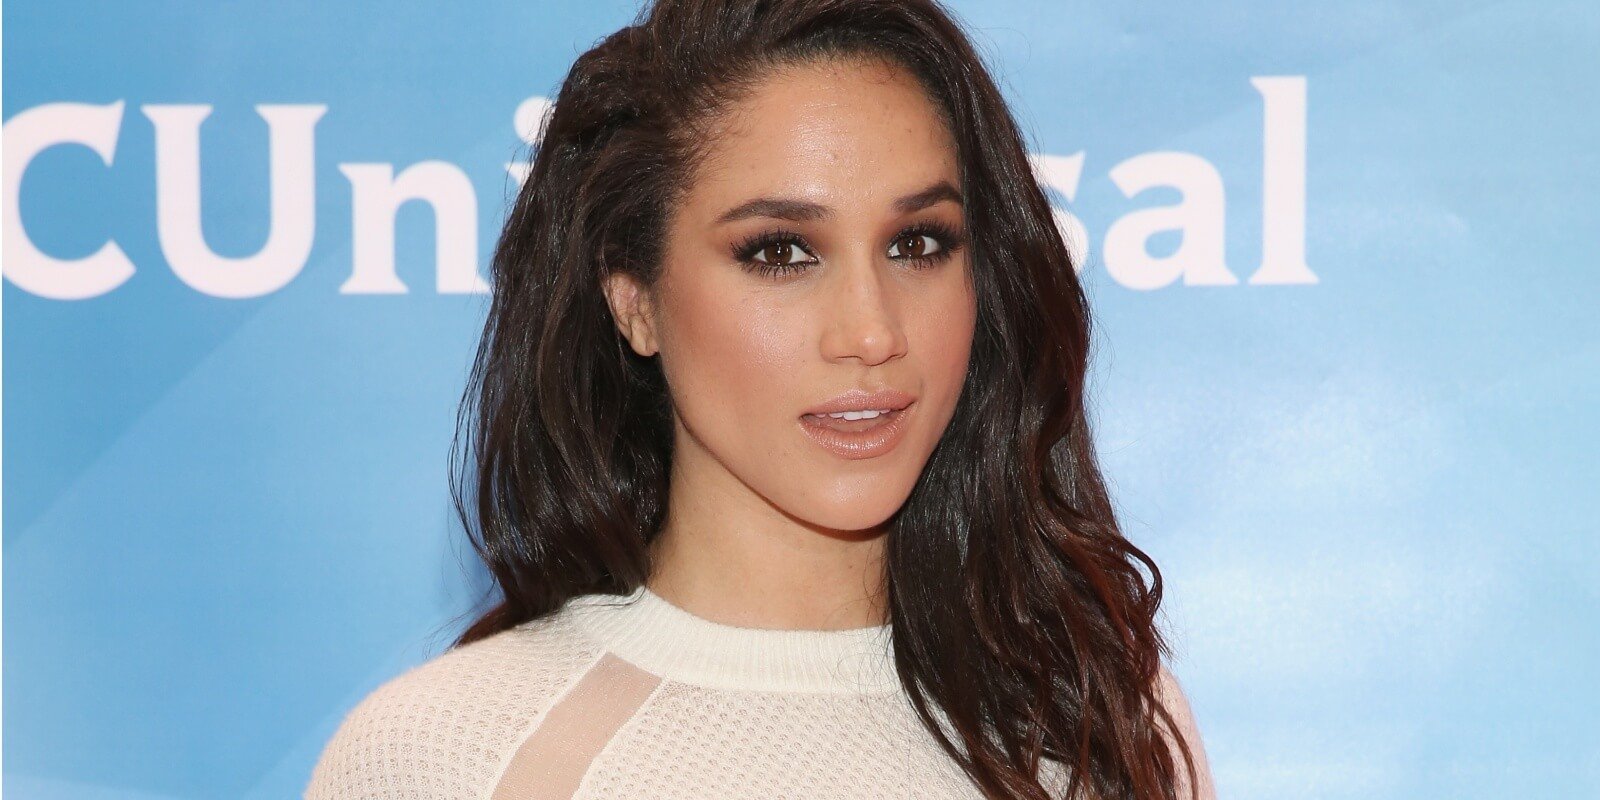 Meghan Markle wore her hair in natural waves back at a red carpet event in 2015.